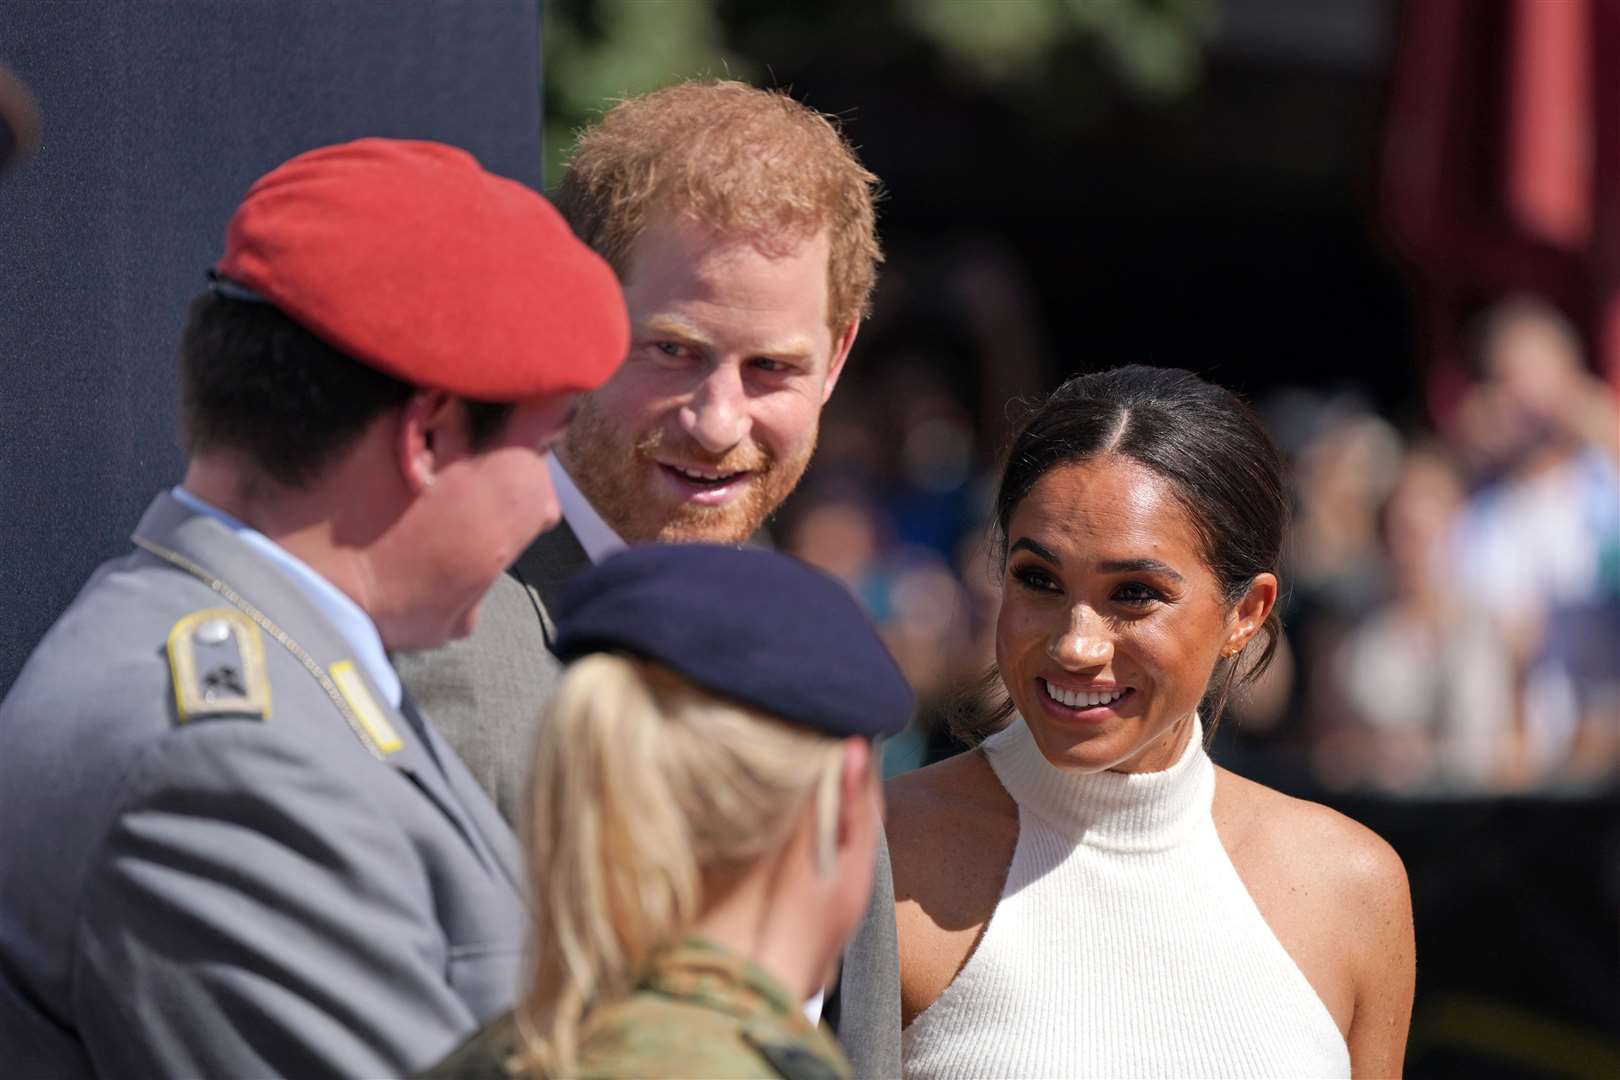 Harry and Meghan were staying in Windsor ahead of a WellChild engagement, which was later cancelled (Joe Giddens/PA)